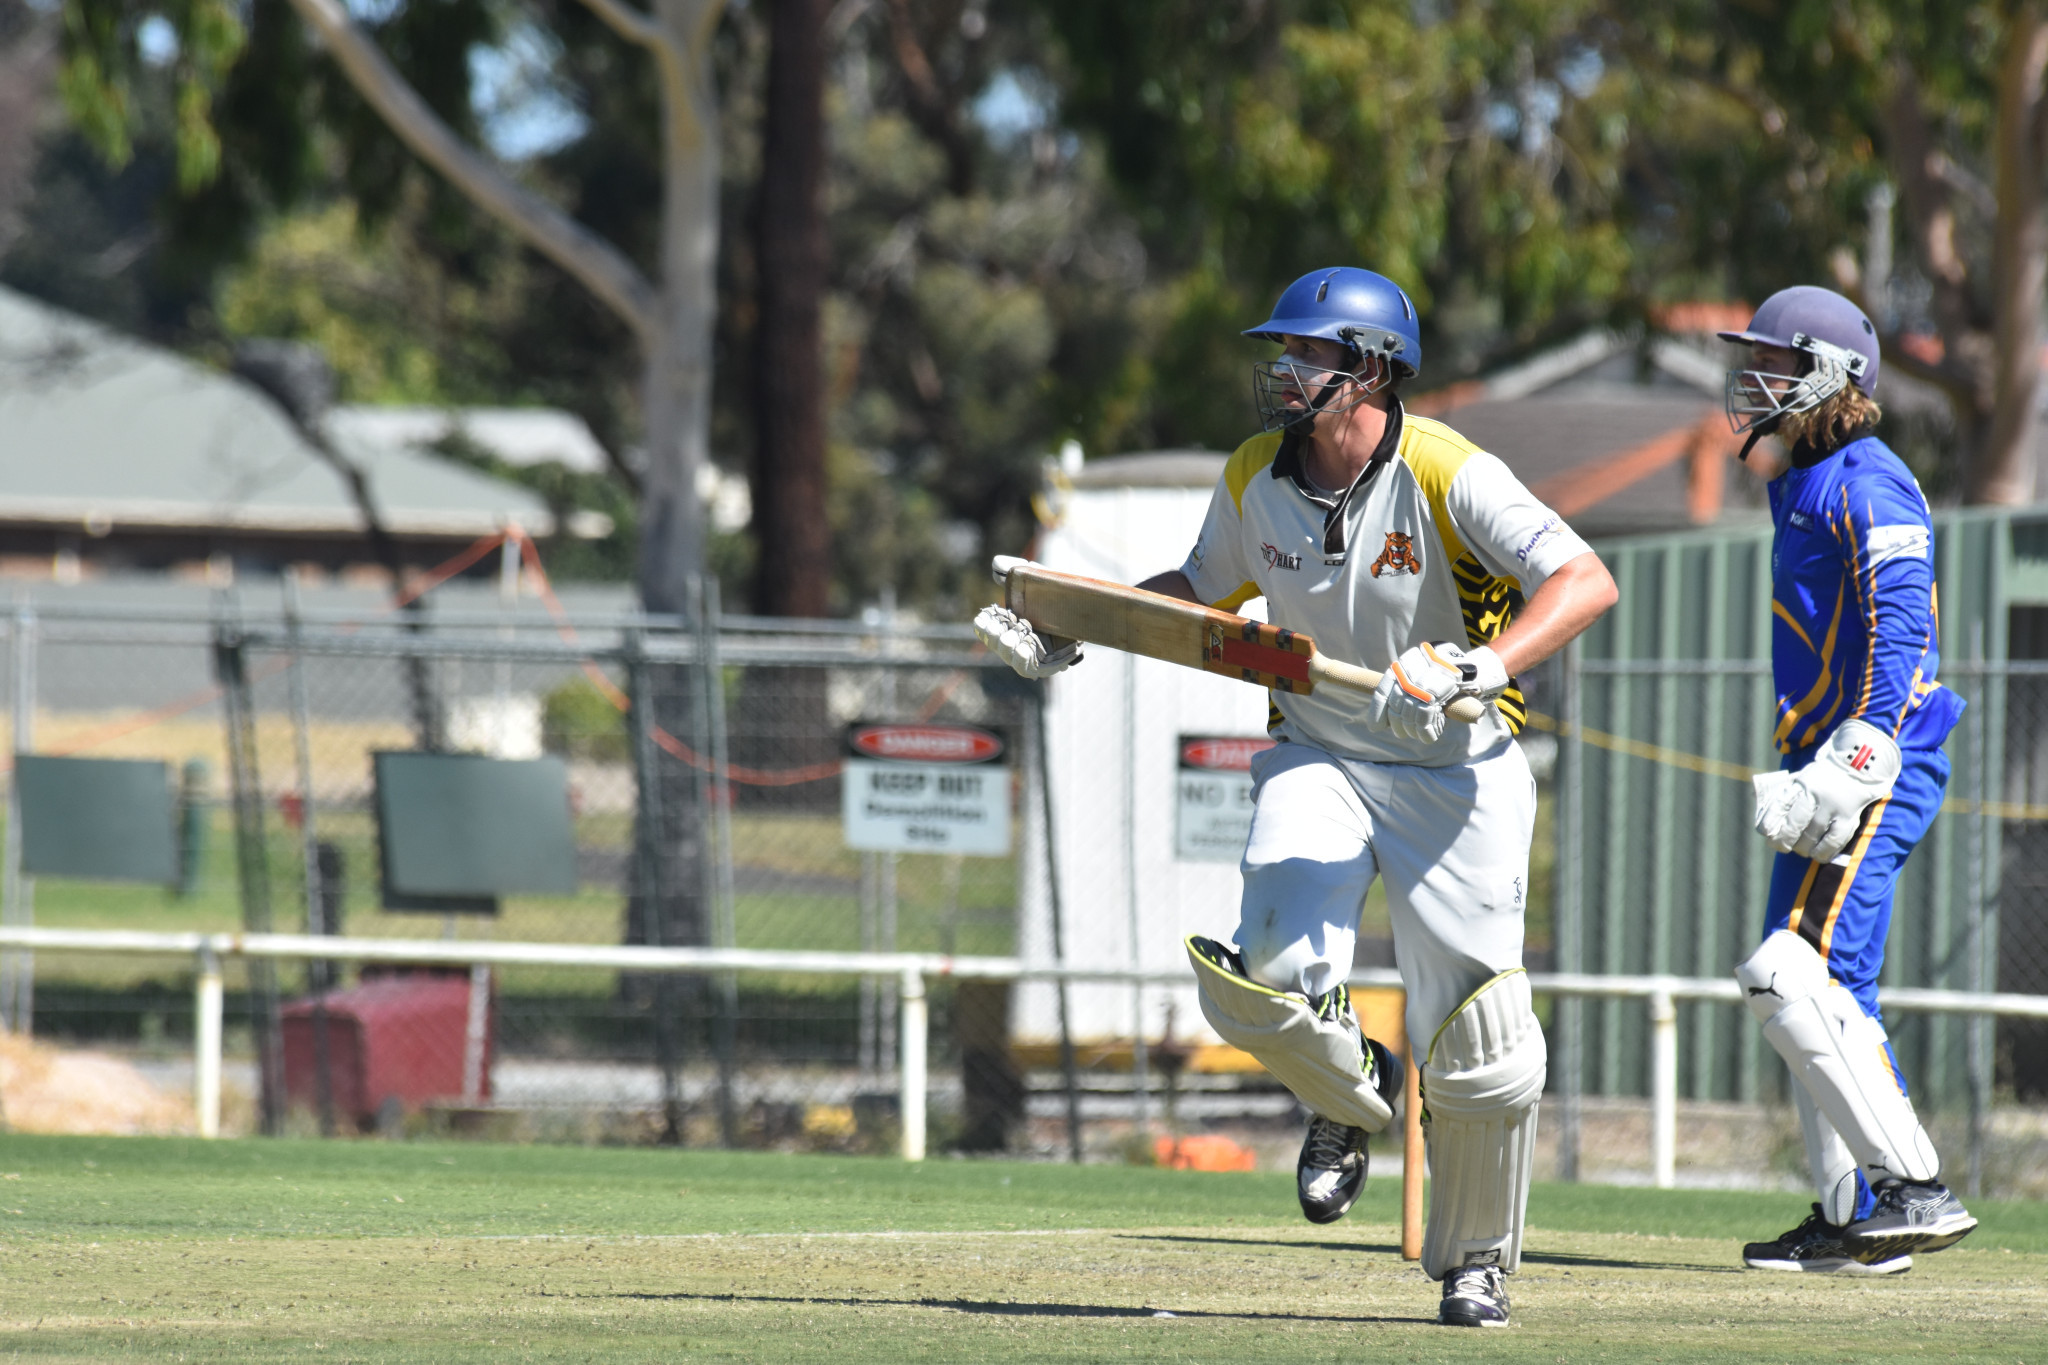 Angus Adams looks for a single for the Tigers against Lubeck Murtoa.